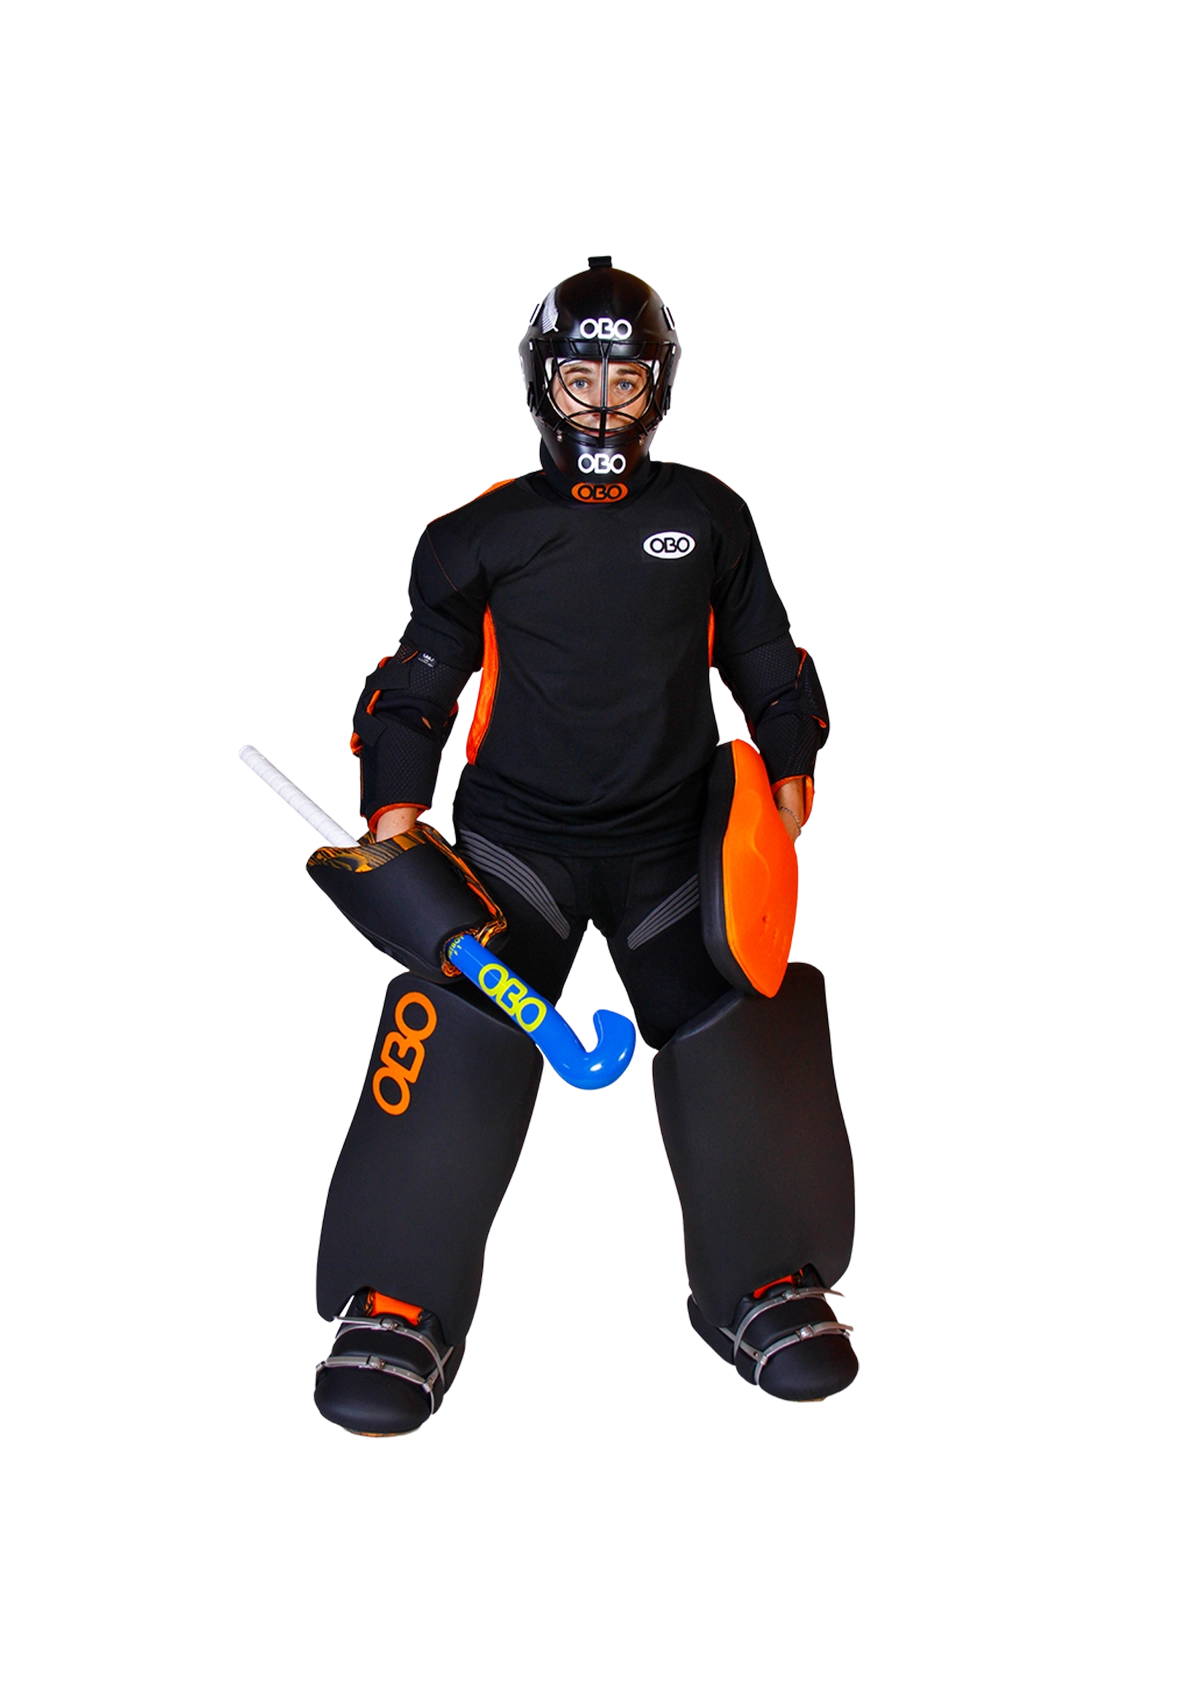 OBO Hockey Gear Review: All you need to know about why OBO is better